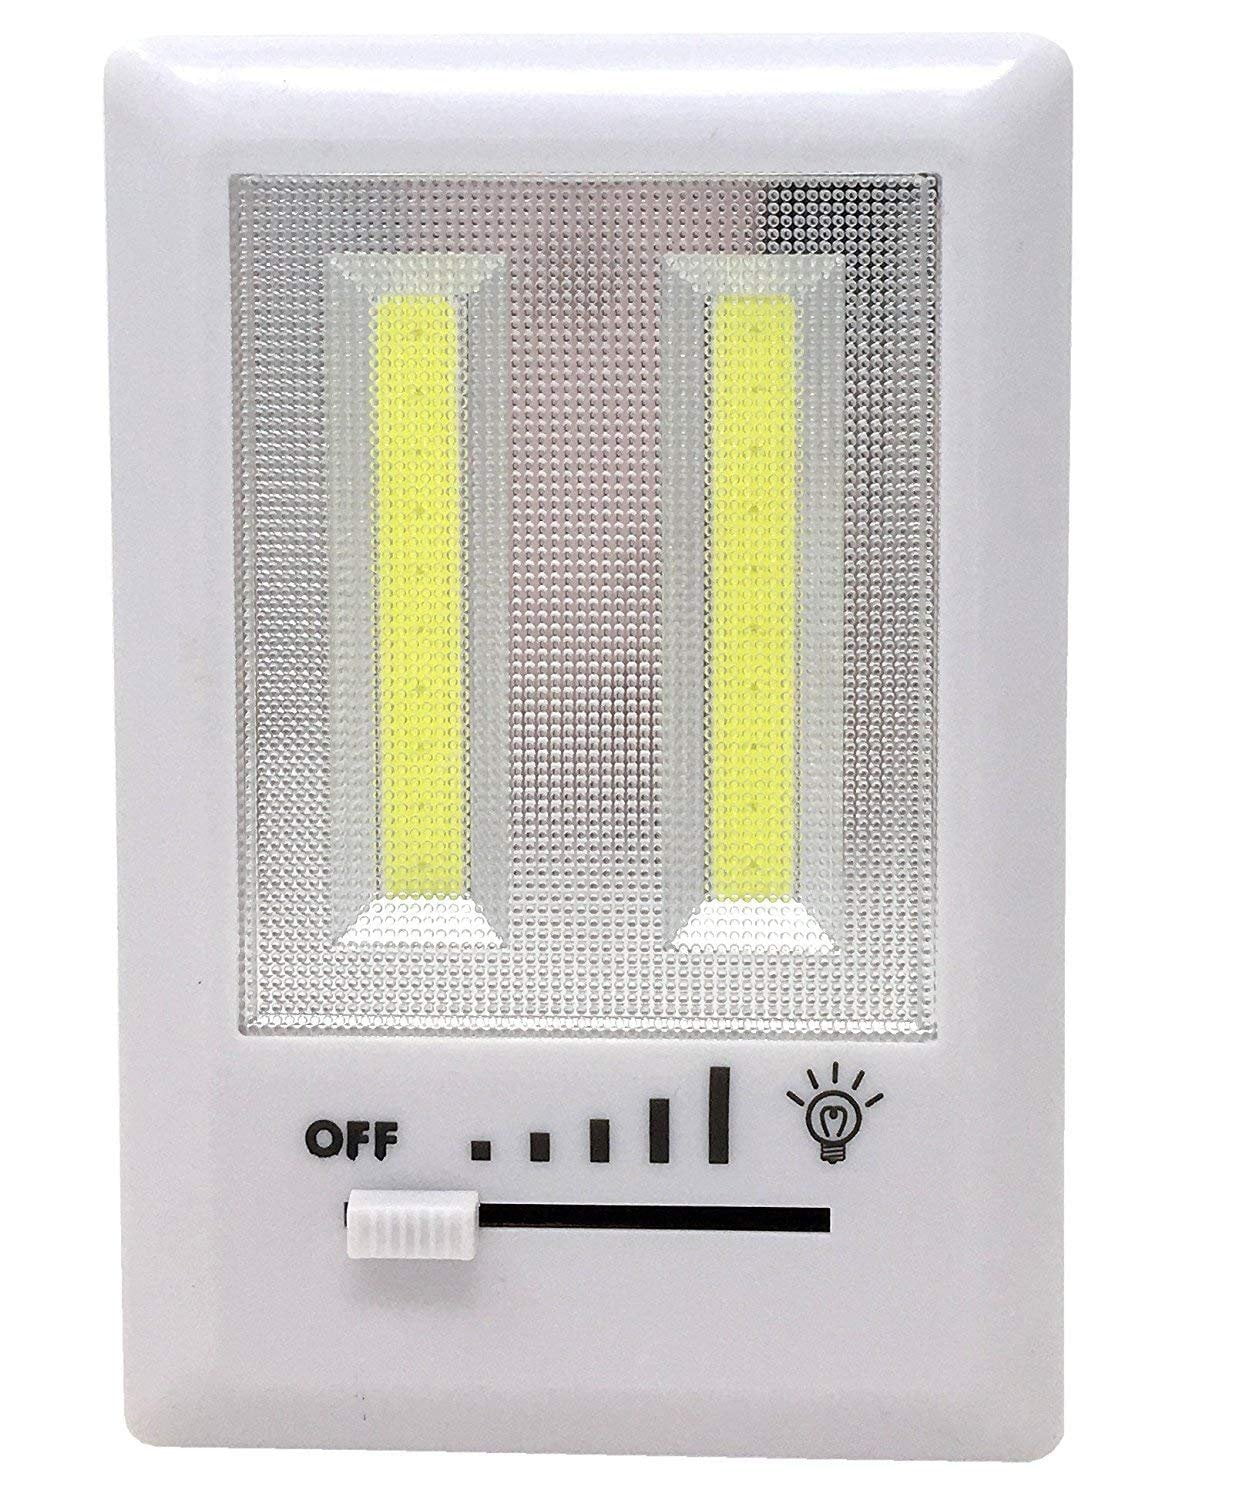 2 X LED BATTERY OPERATED DOUBLE SWITCH NIGHT LIGHT CORDLESS BRIGHT COB CABINET 